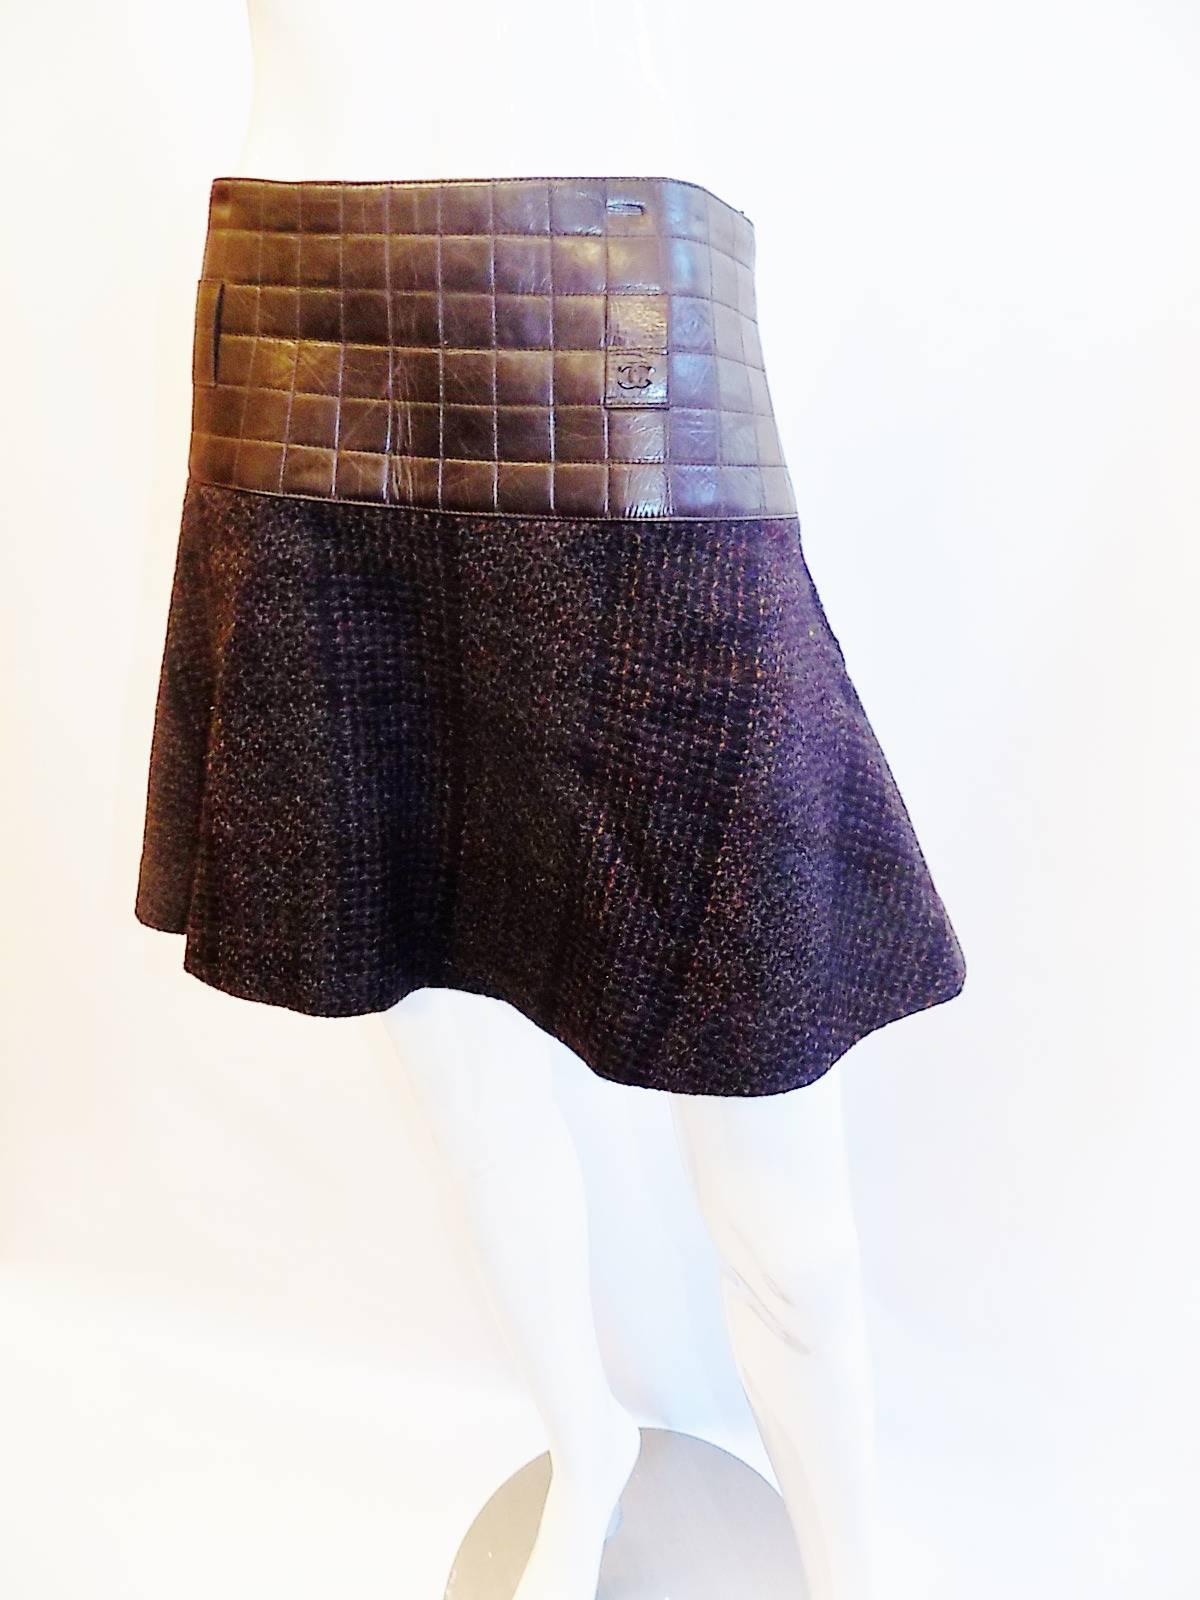 Must Have for winter with boots! dark distressed quilted leather with flare skater look wool buckle.  Belt loops concealed at the low hip area. Absolutely adorable skirt!!   Pristine condition. Like new. Collection Fall 2002 
size 38 low waist 32